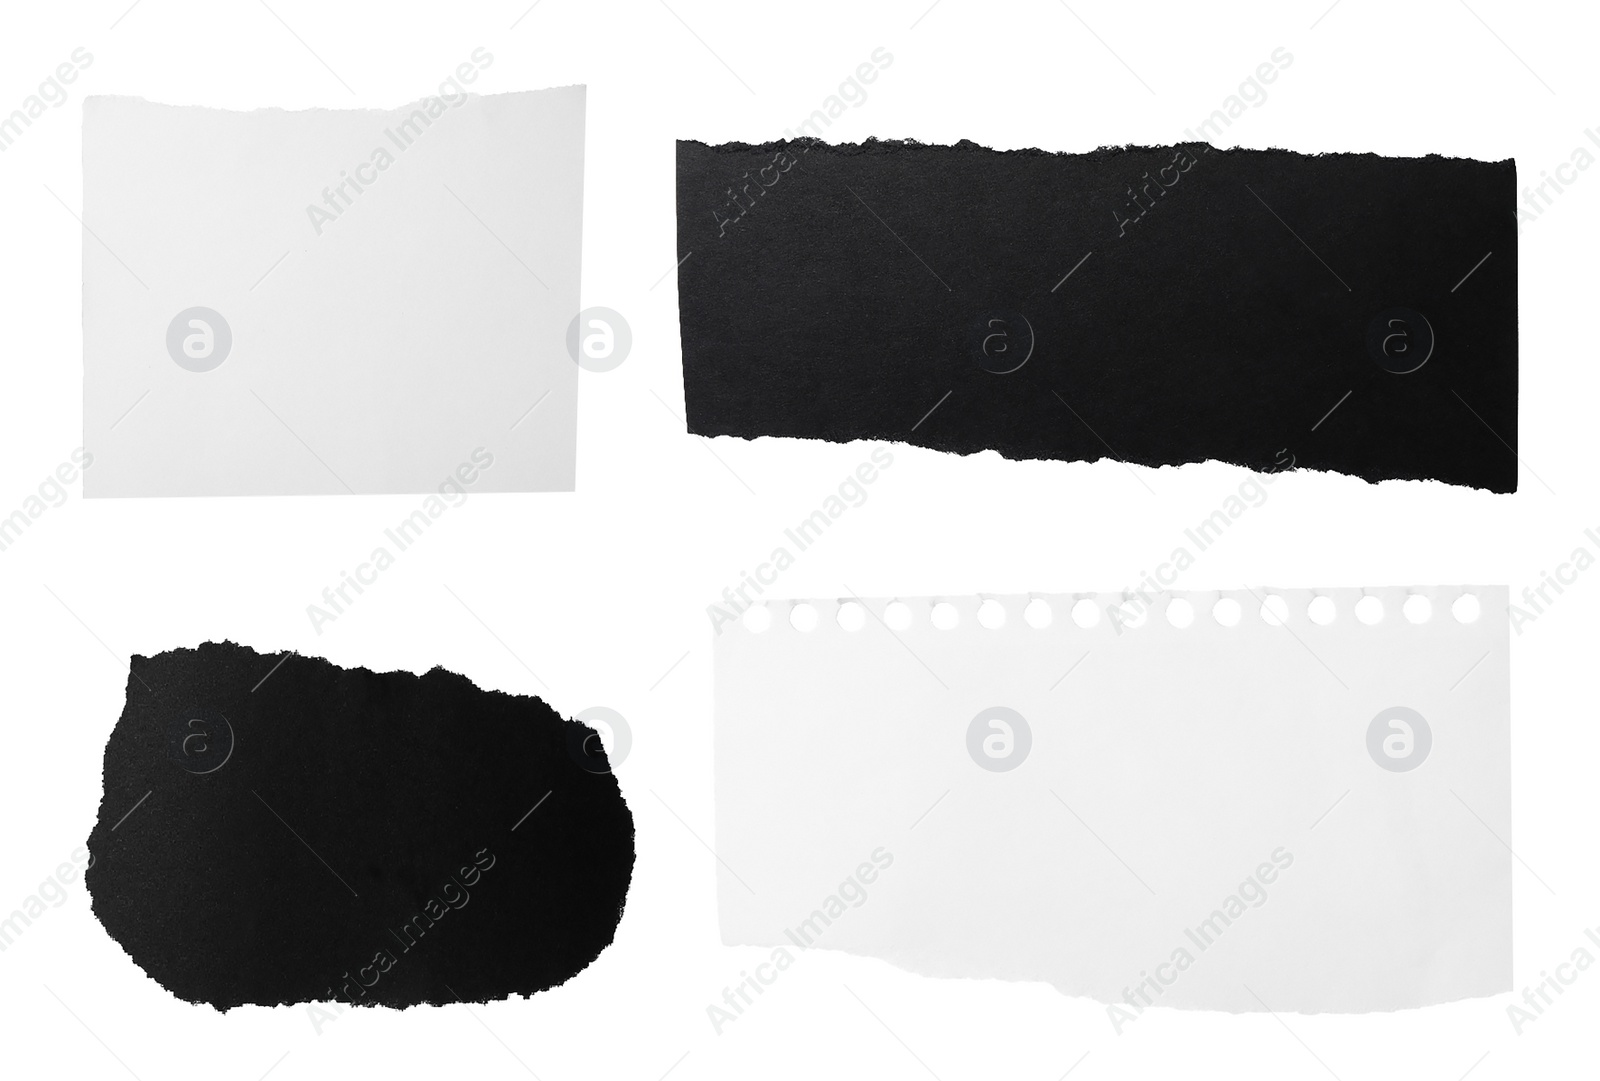 Image of Set of different ripped notebook papers on white background